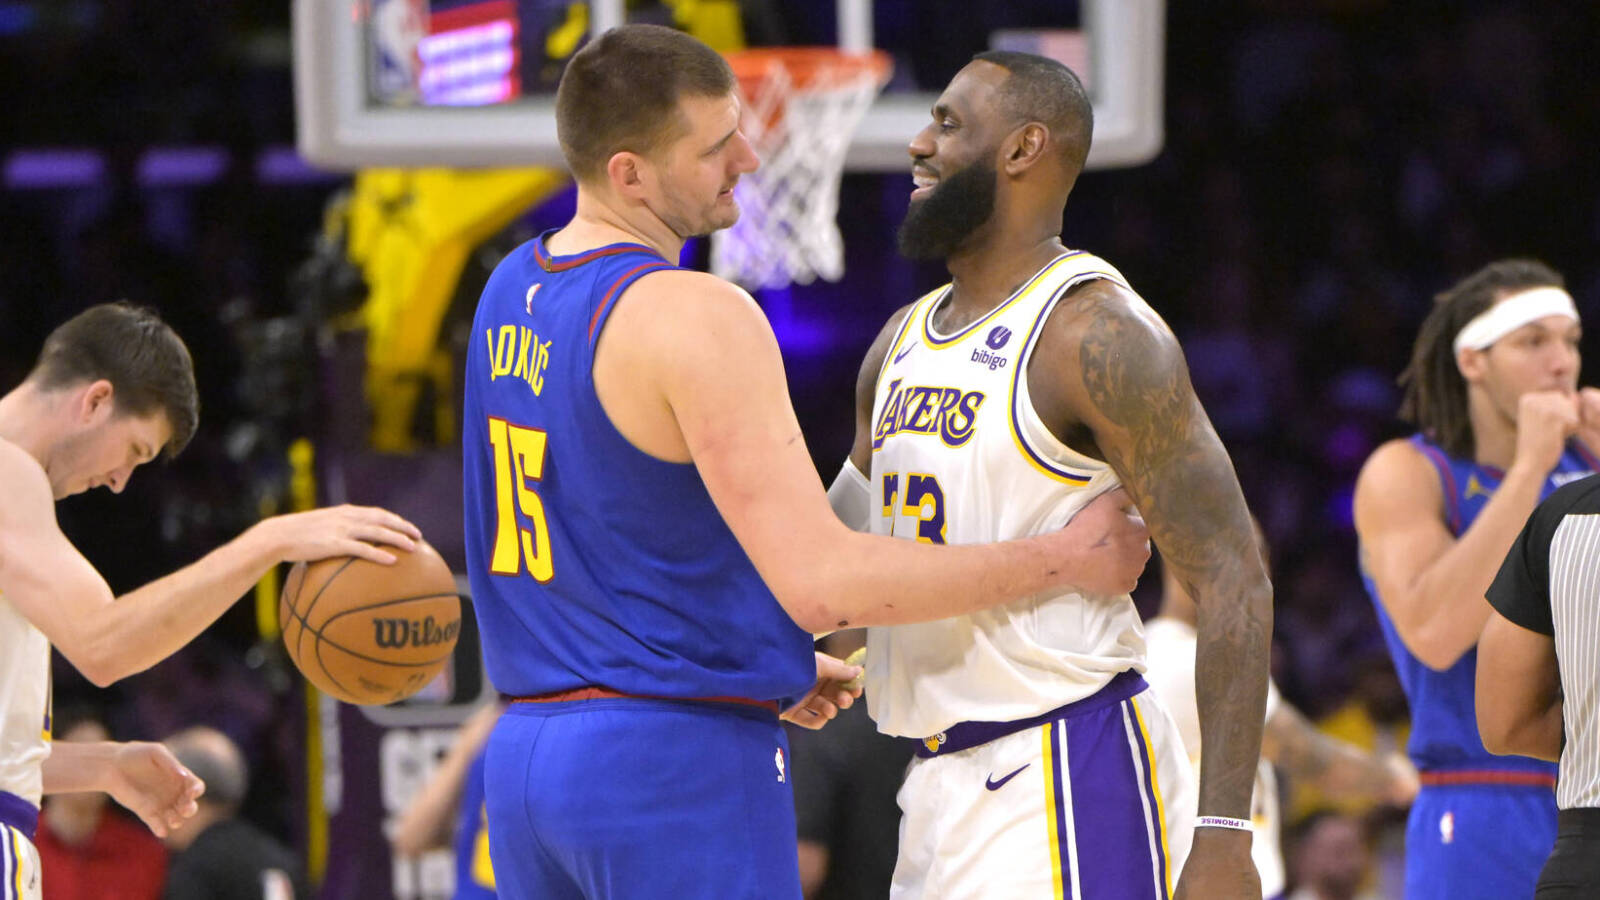 The NBA's top first-round postseason matchups dependent on play-in outcomes